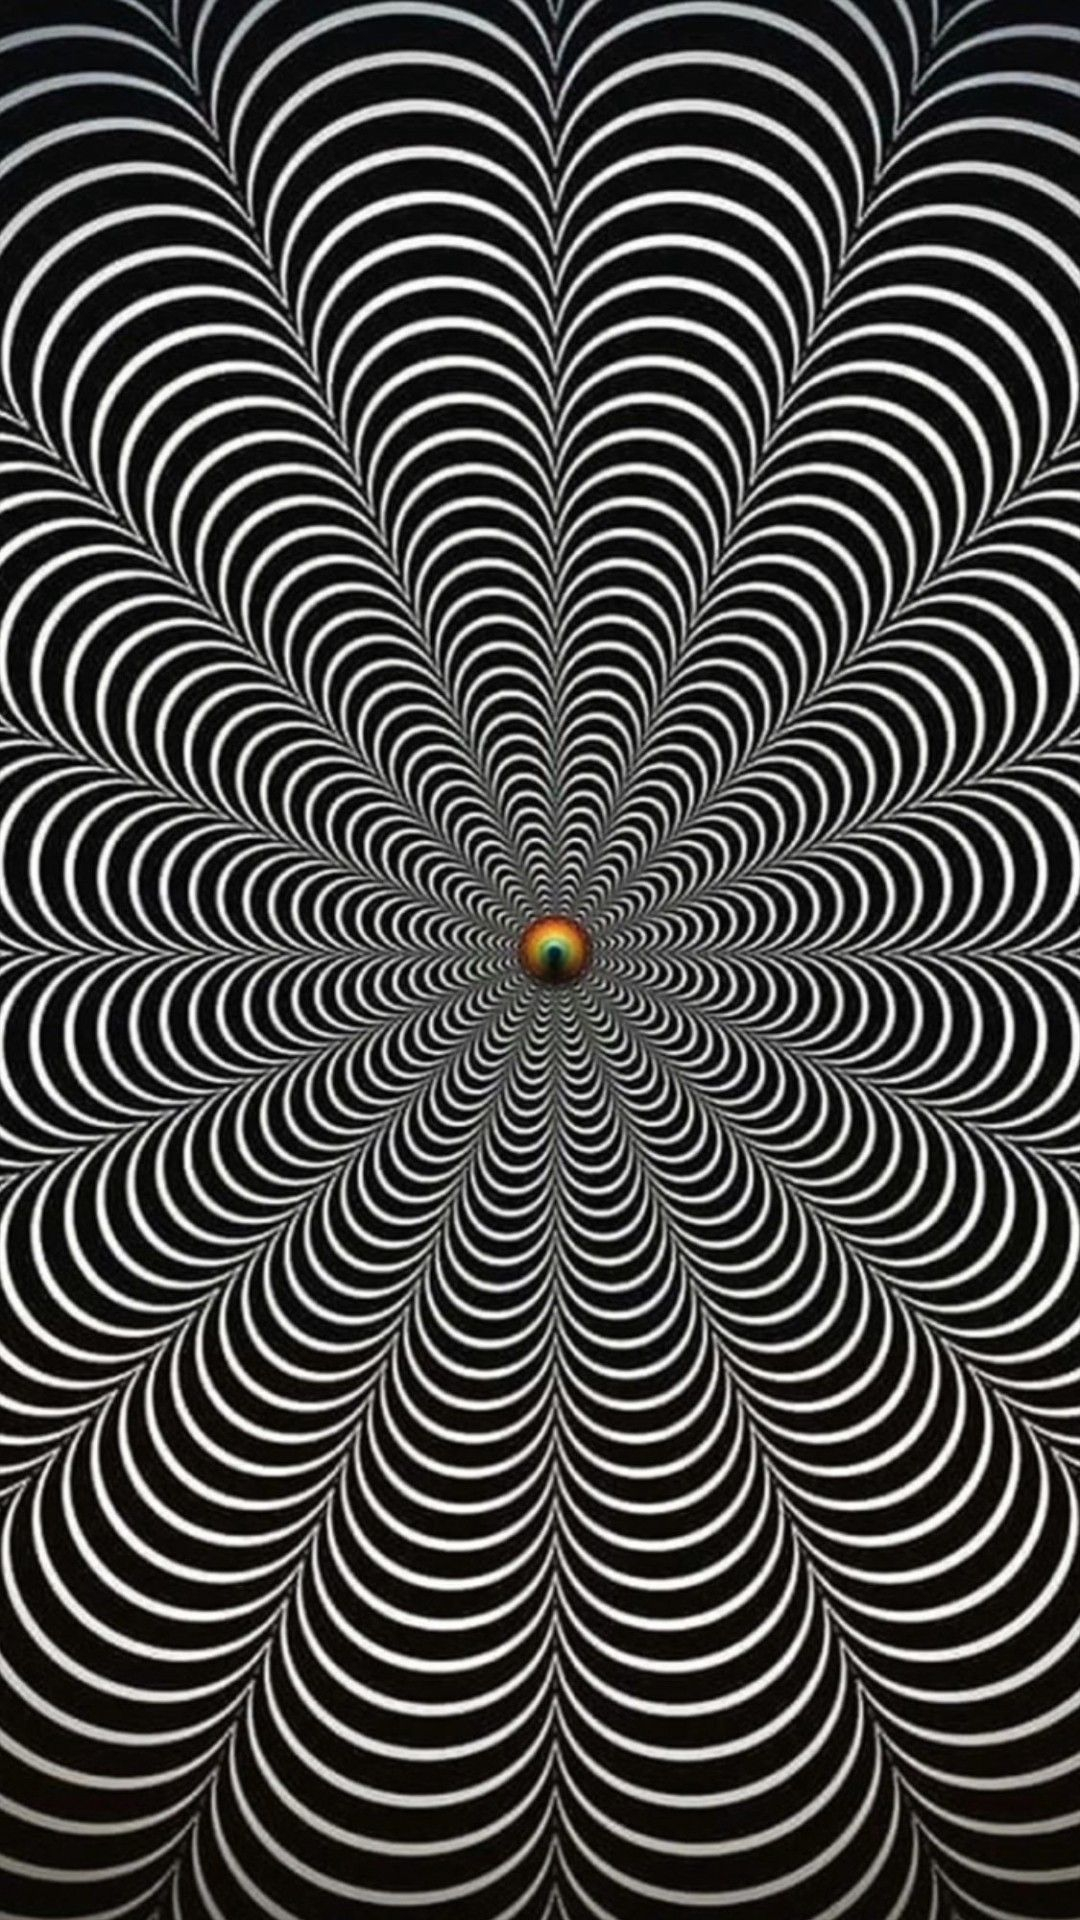 1080x1920 Pin by Dux on Gifs in 2022 | Optical illusion wallpaper, Optical illusion drawing, Optical illusions art